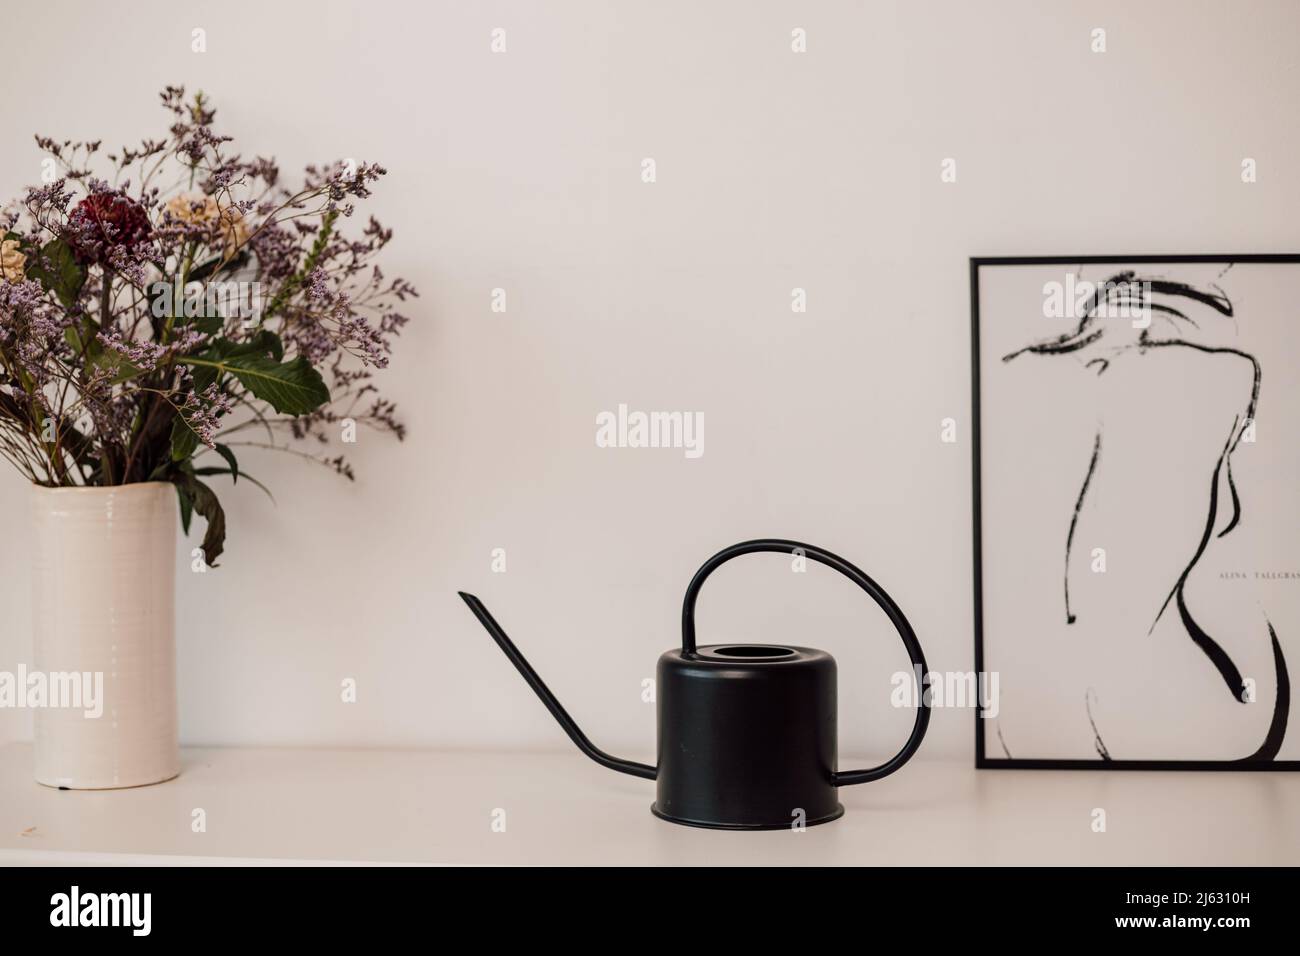 A black flower sprinkler stands on a white shelf near flowers and paintings Stock Photo